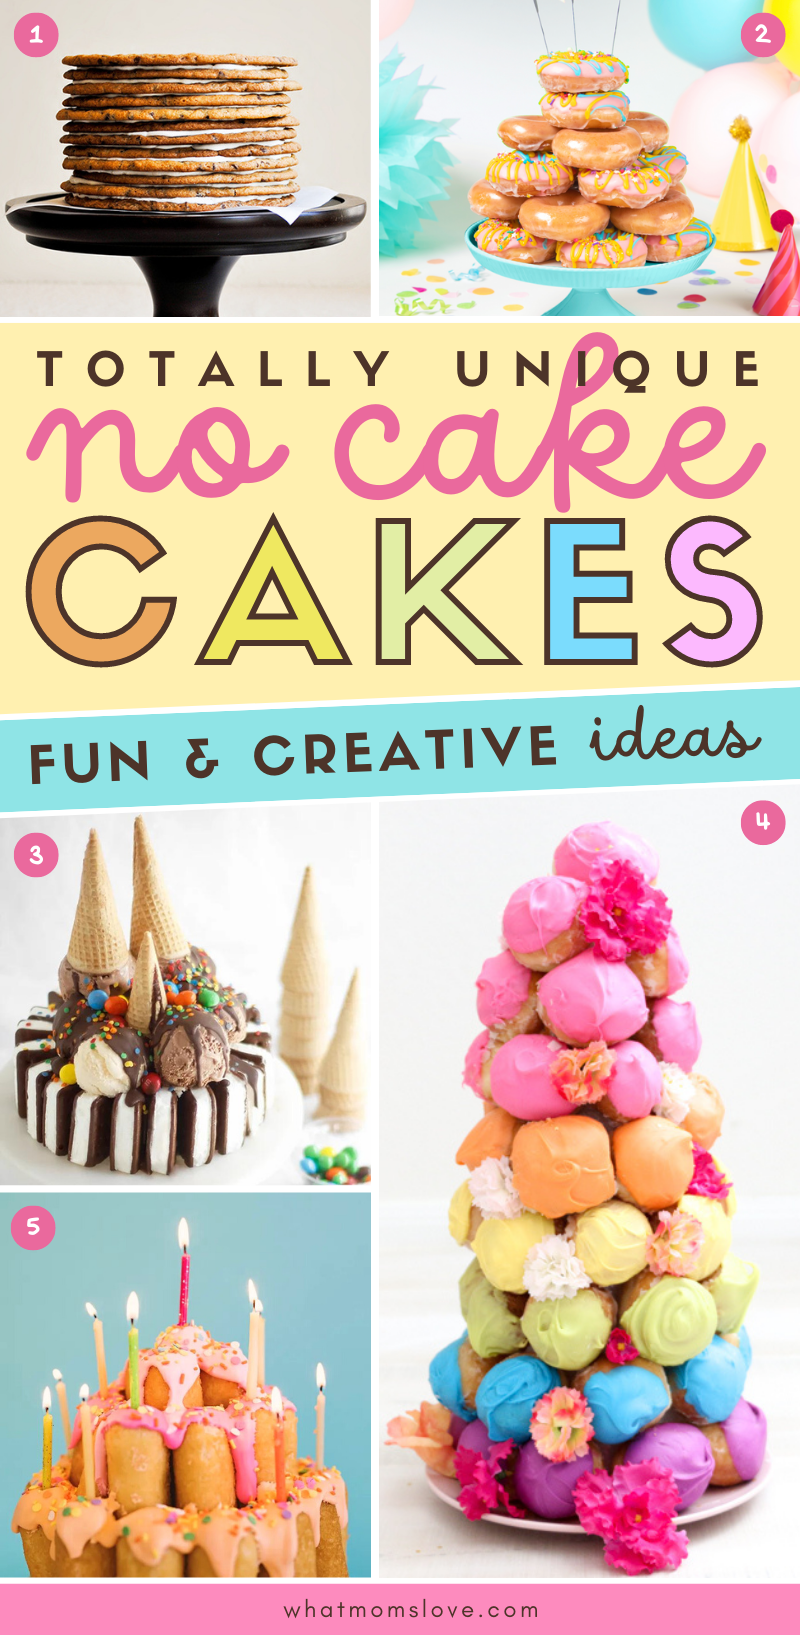 21 Creative Cakes That Blur The Line Between Confectionery And Art |  DeMilked